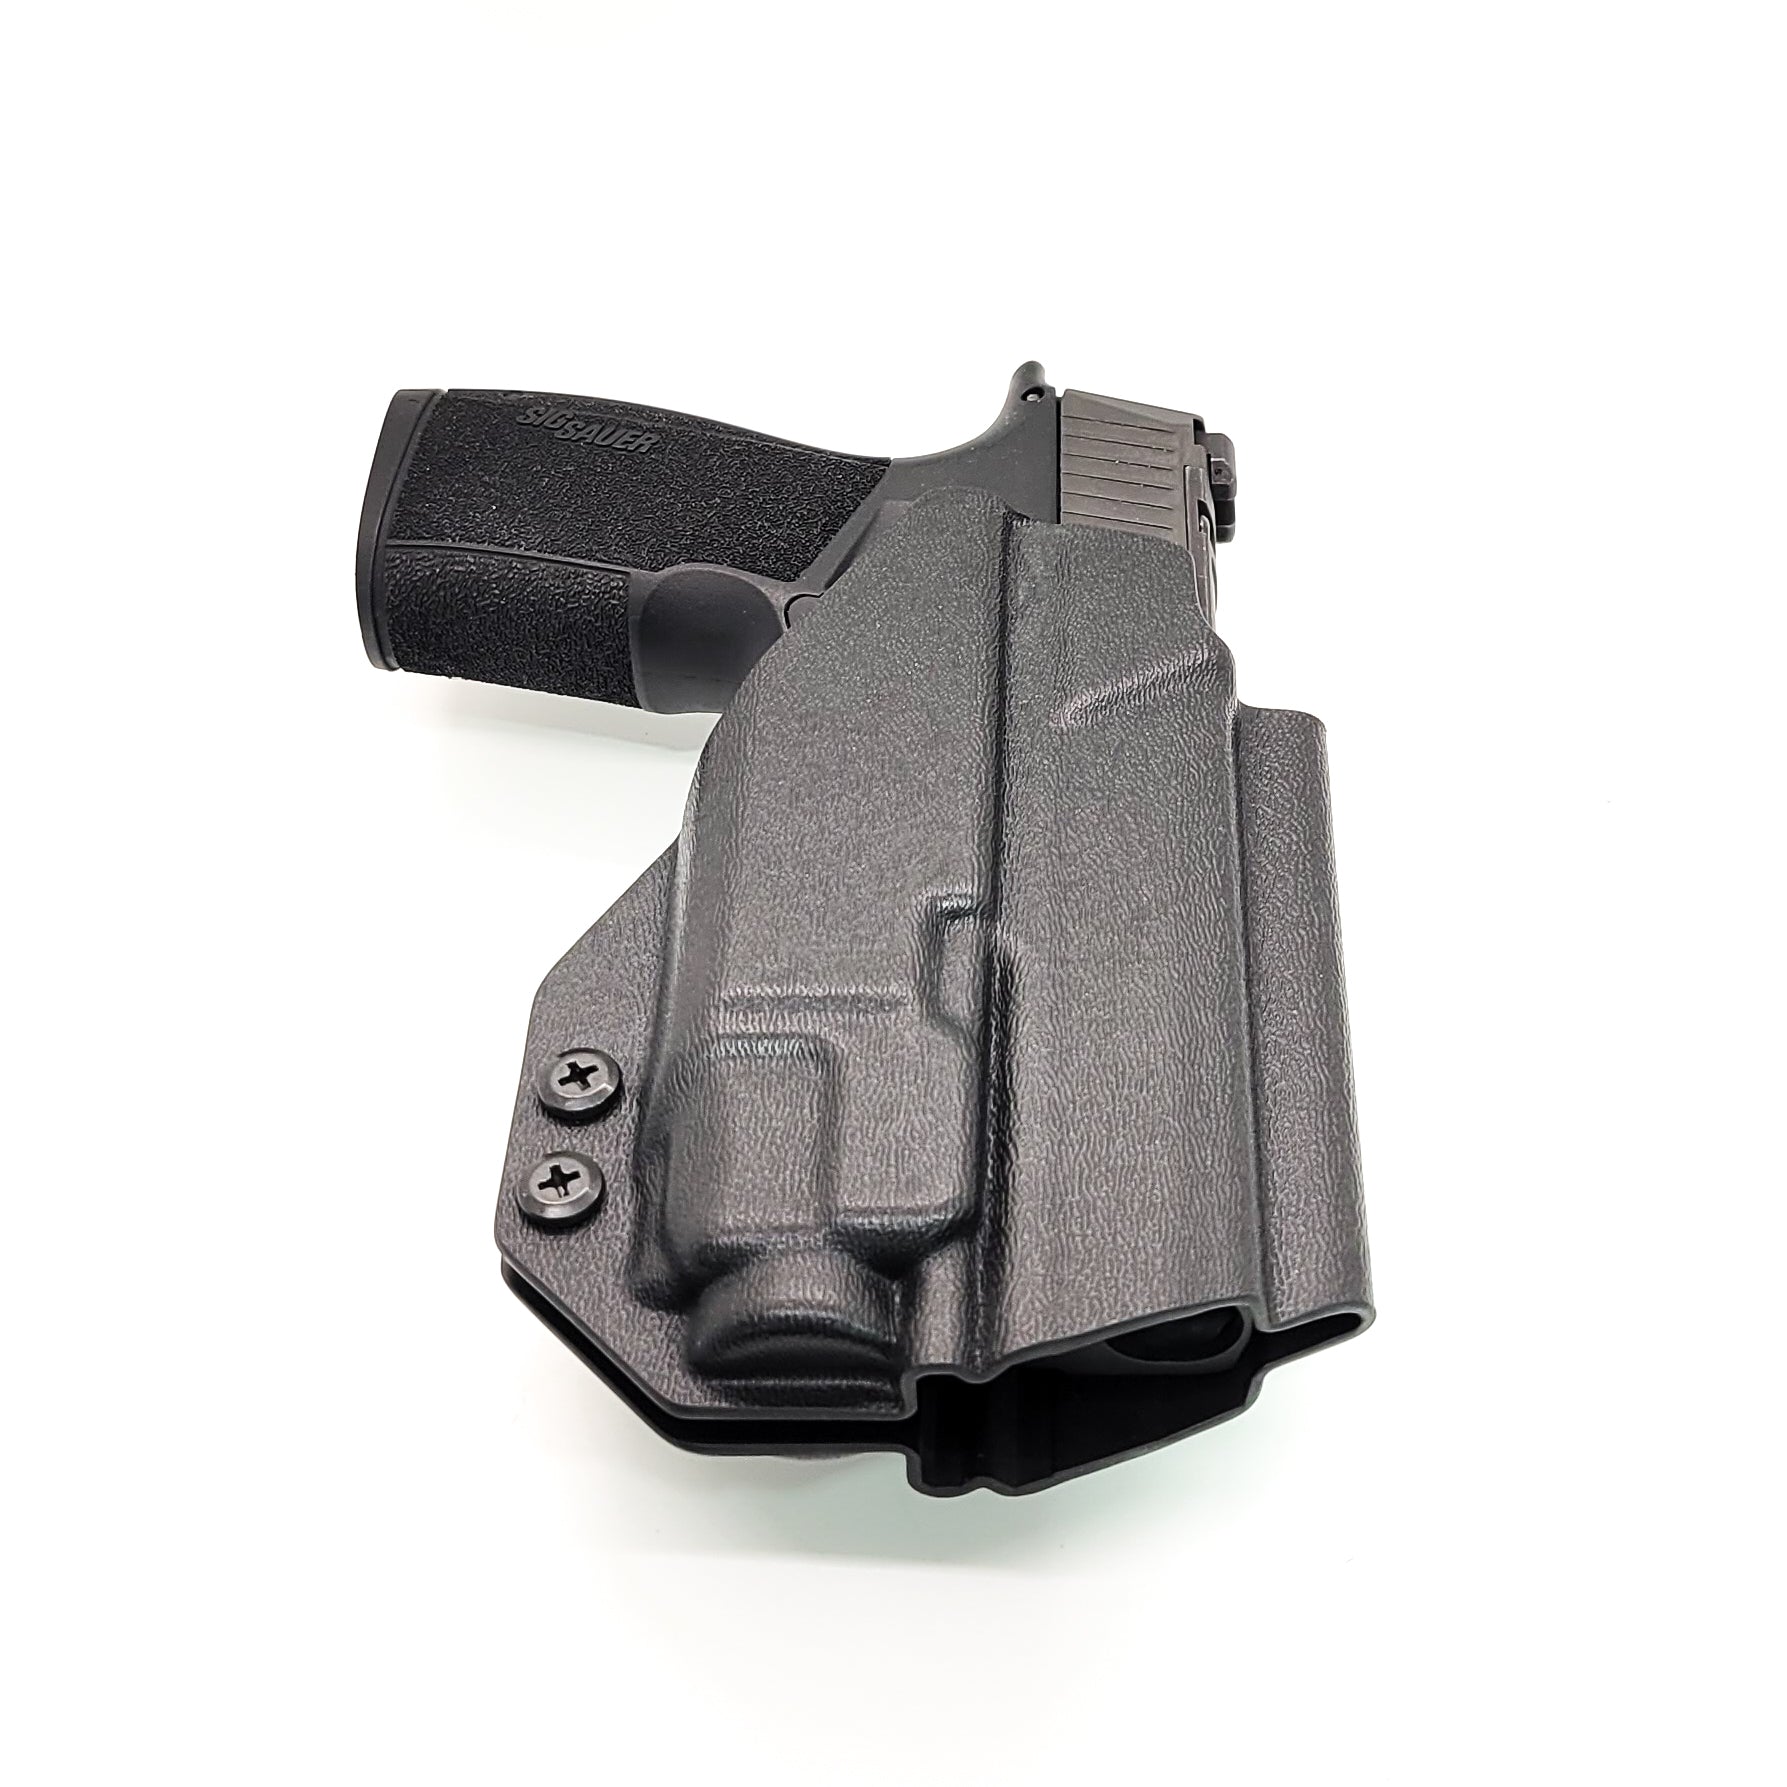 For the best, Outside Waistband OWB Kydex Holster designed for the Sig Sauer P365-XMACRO and Macro Comp with Streamlight TLR-8 A G, shop Four Brothers Holsters. Full sweat guard, adjustable retention, cut for reduced printing. Made in the USA. Open muzzle for threaded barrels, cleared for red dot sights. MACRO